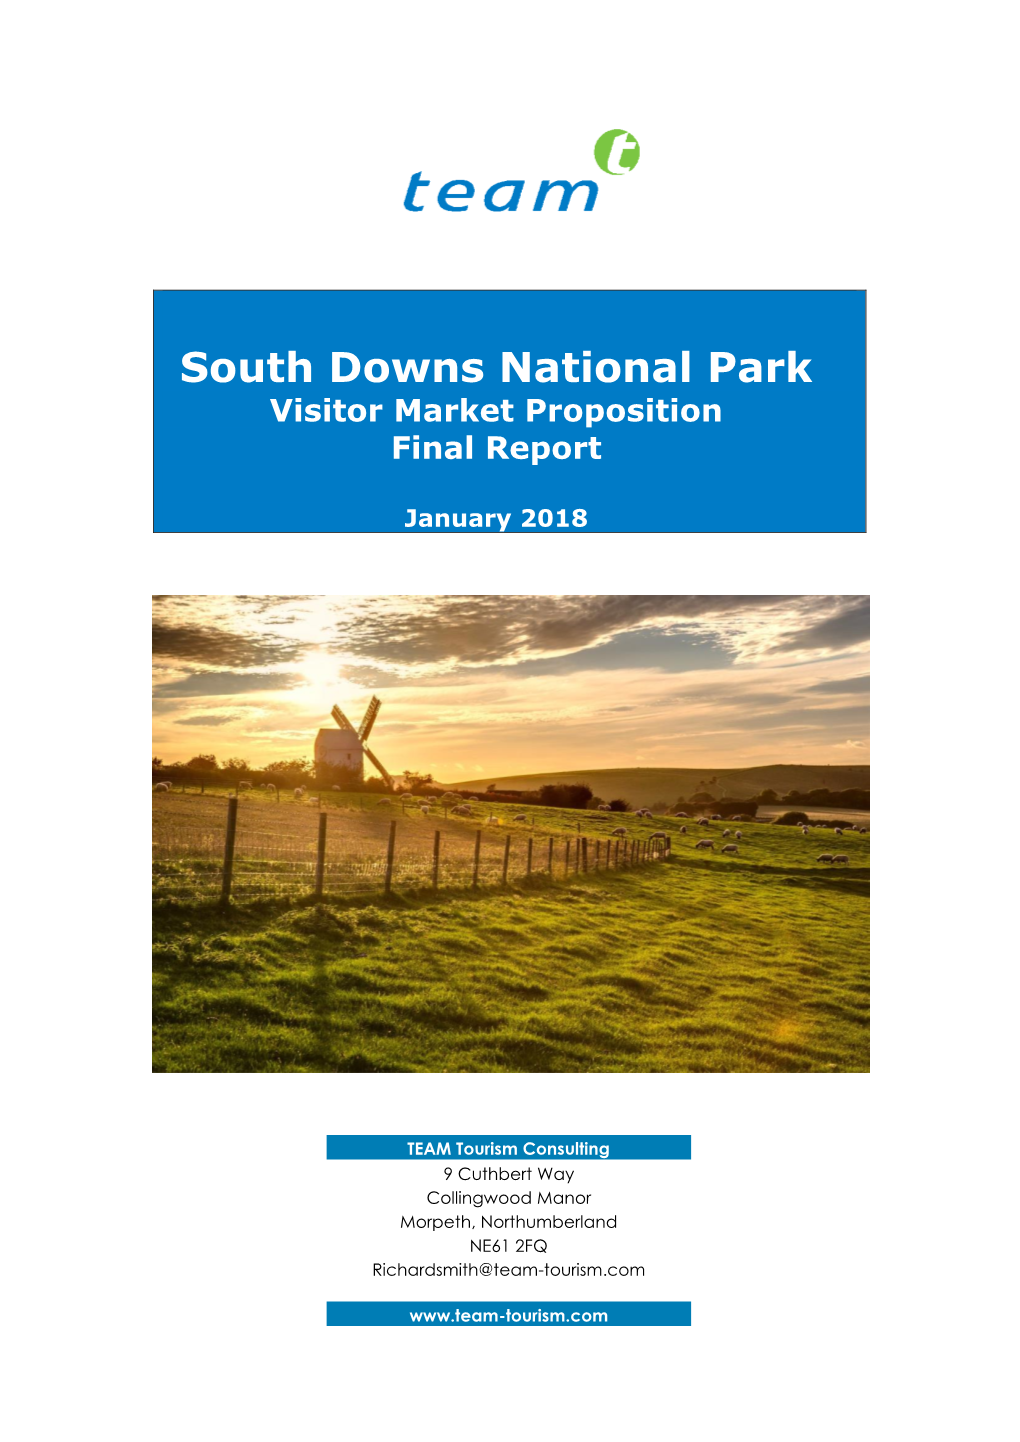 South Downs National Park Visitor Market Proposition Final Report